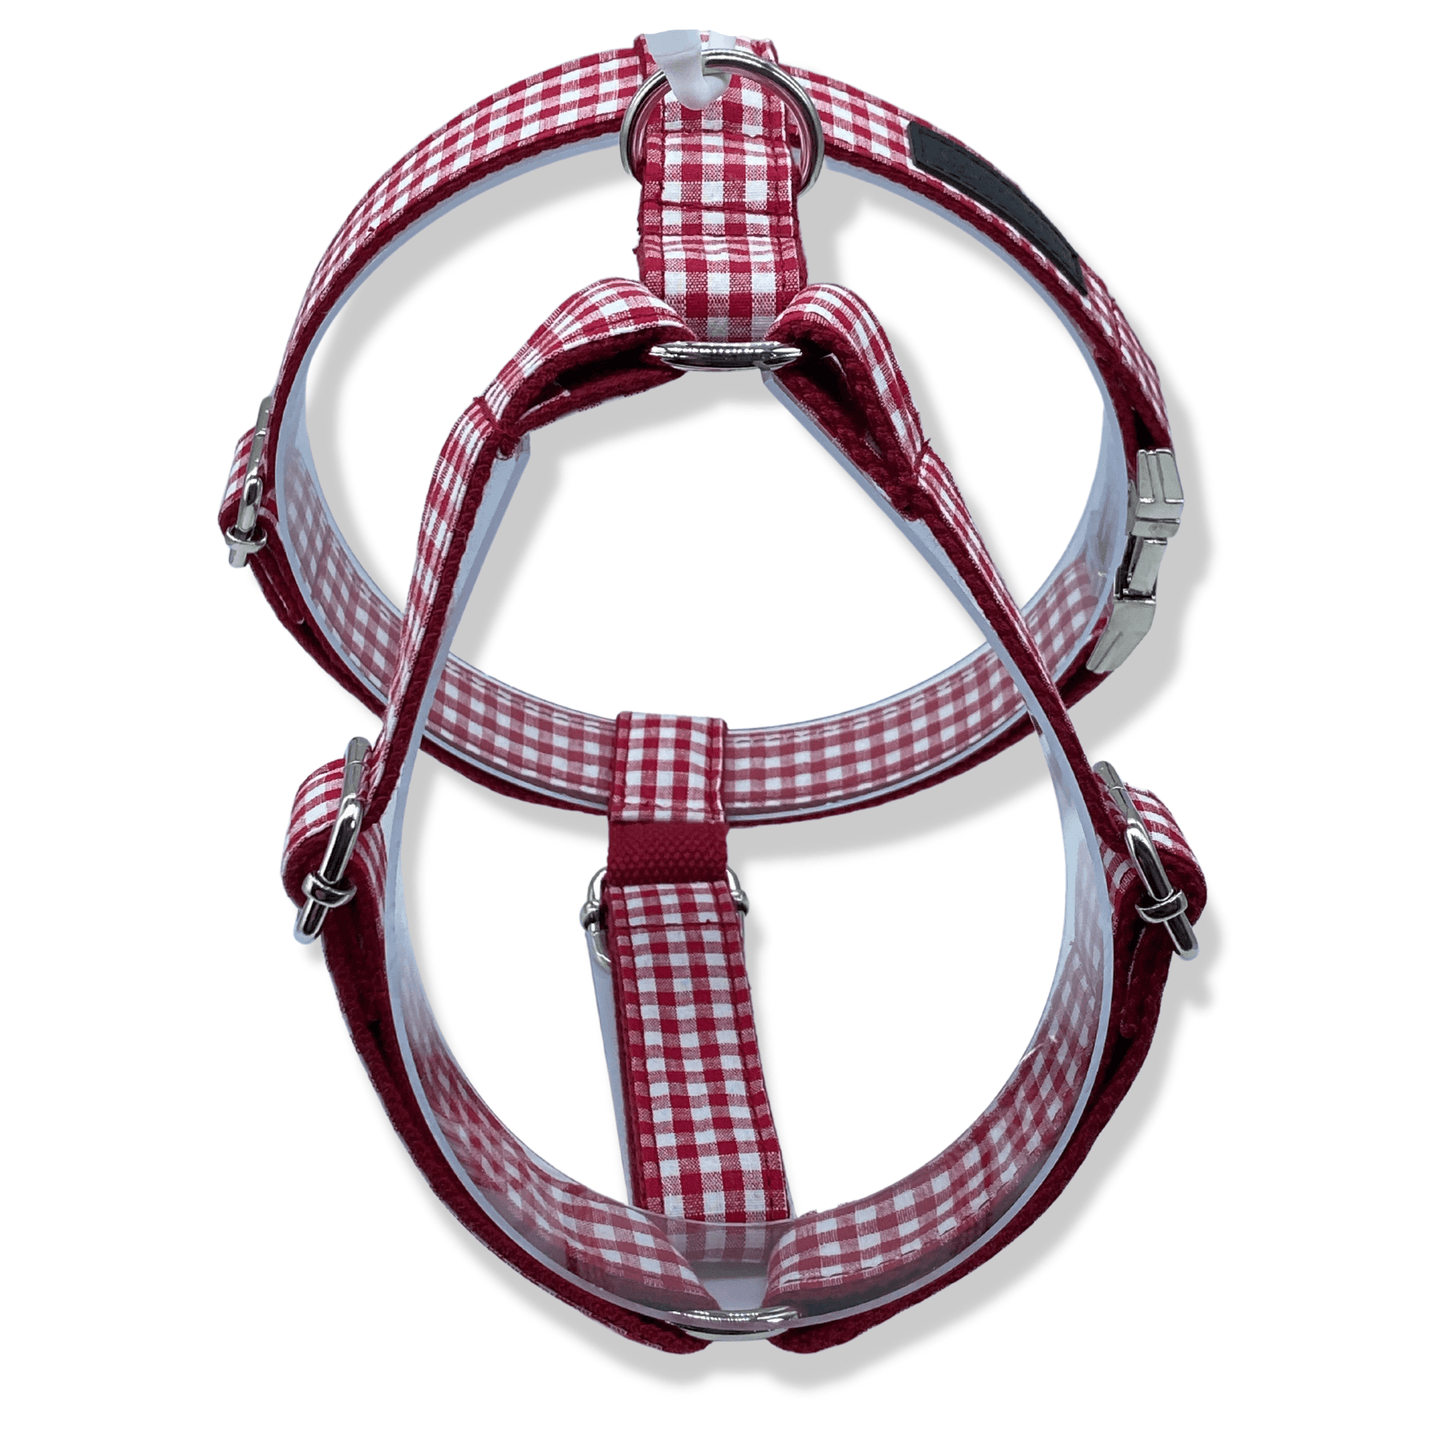 Picnic in the Park Customized Dog Harness - Sam and Dot